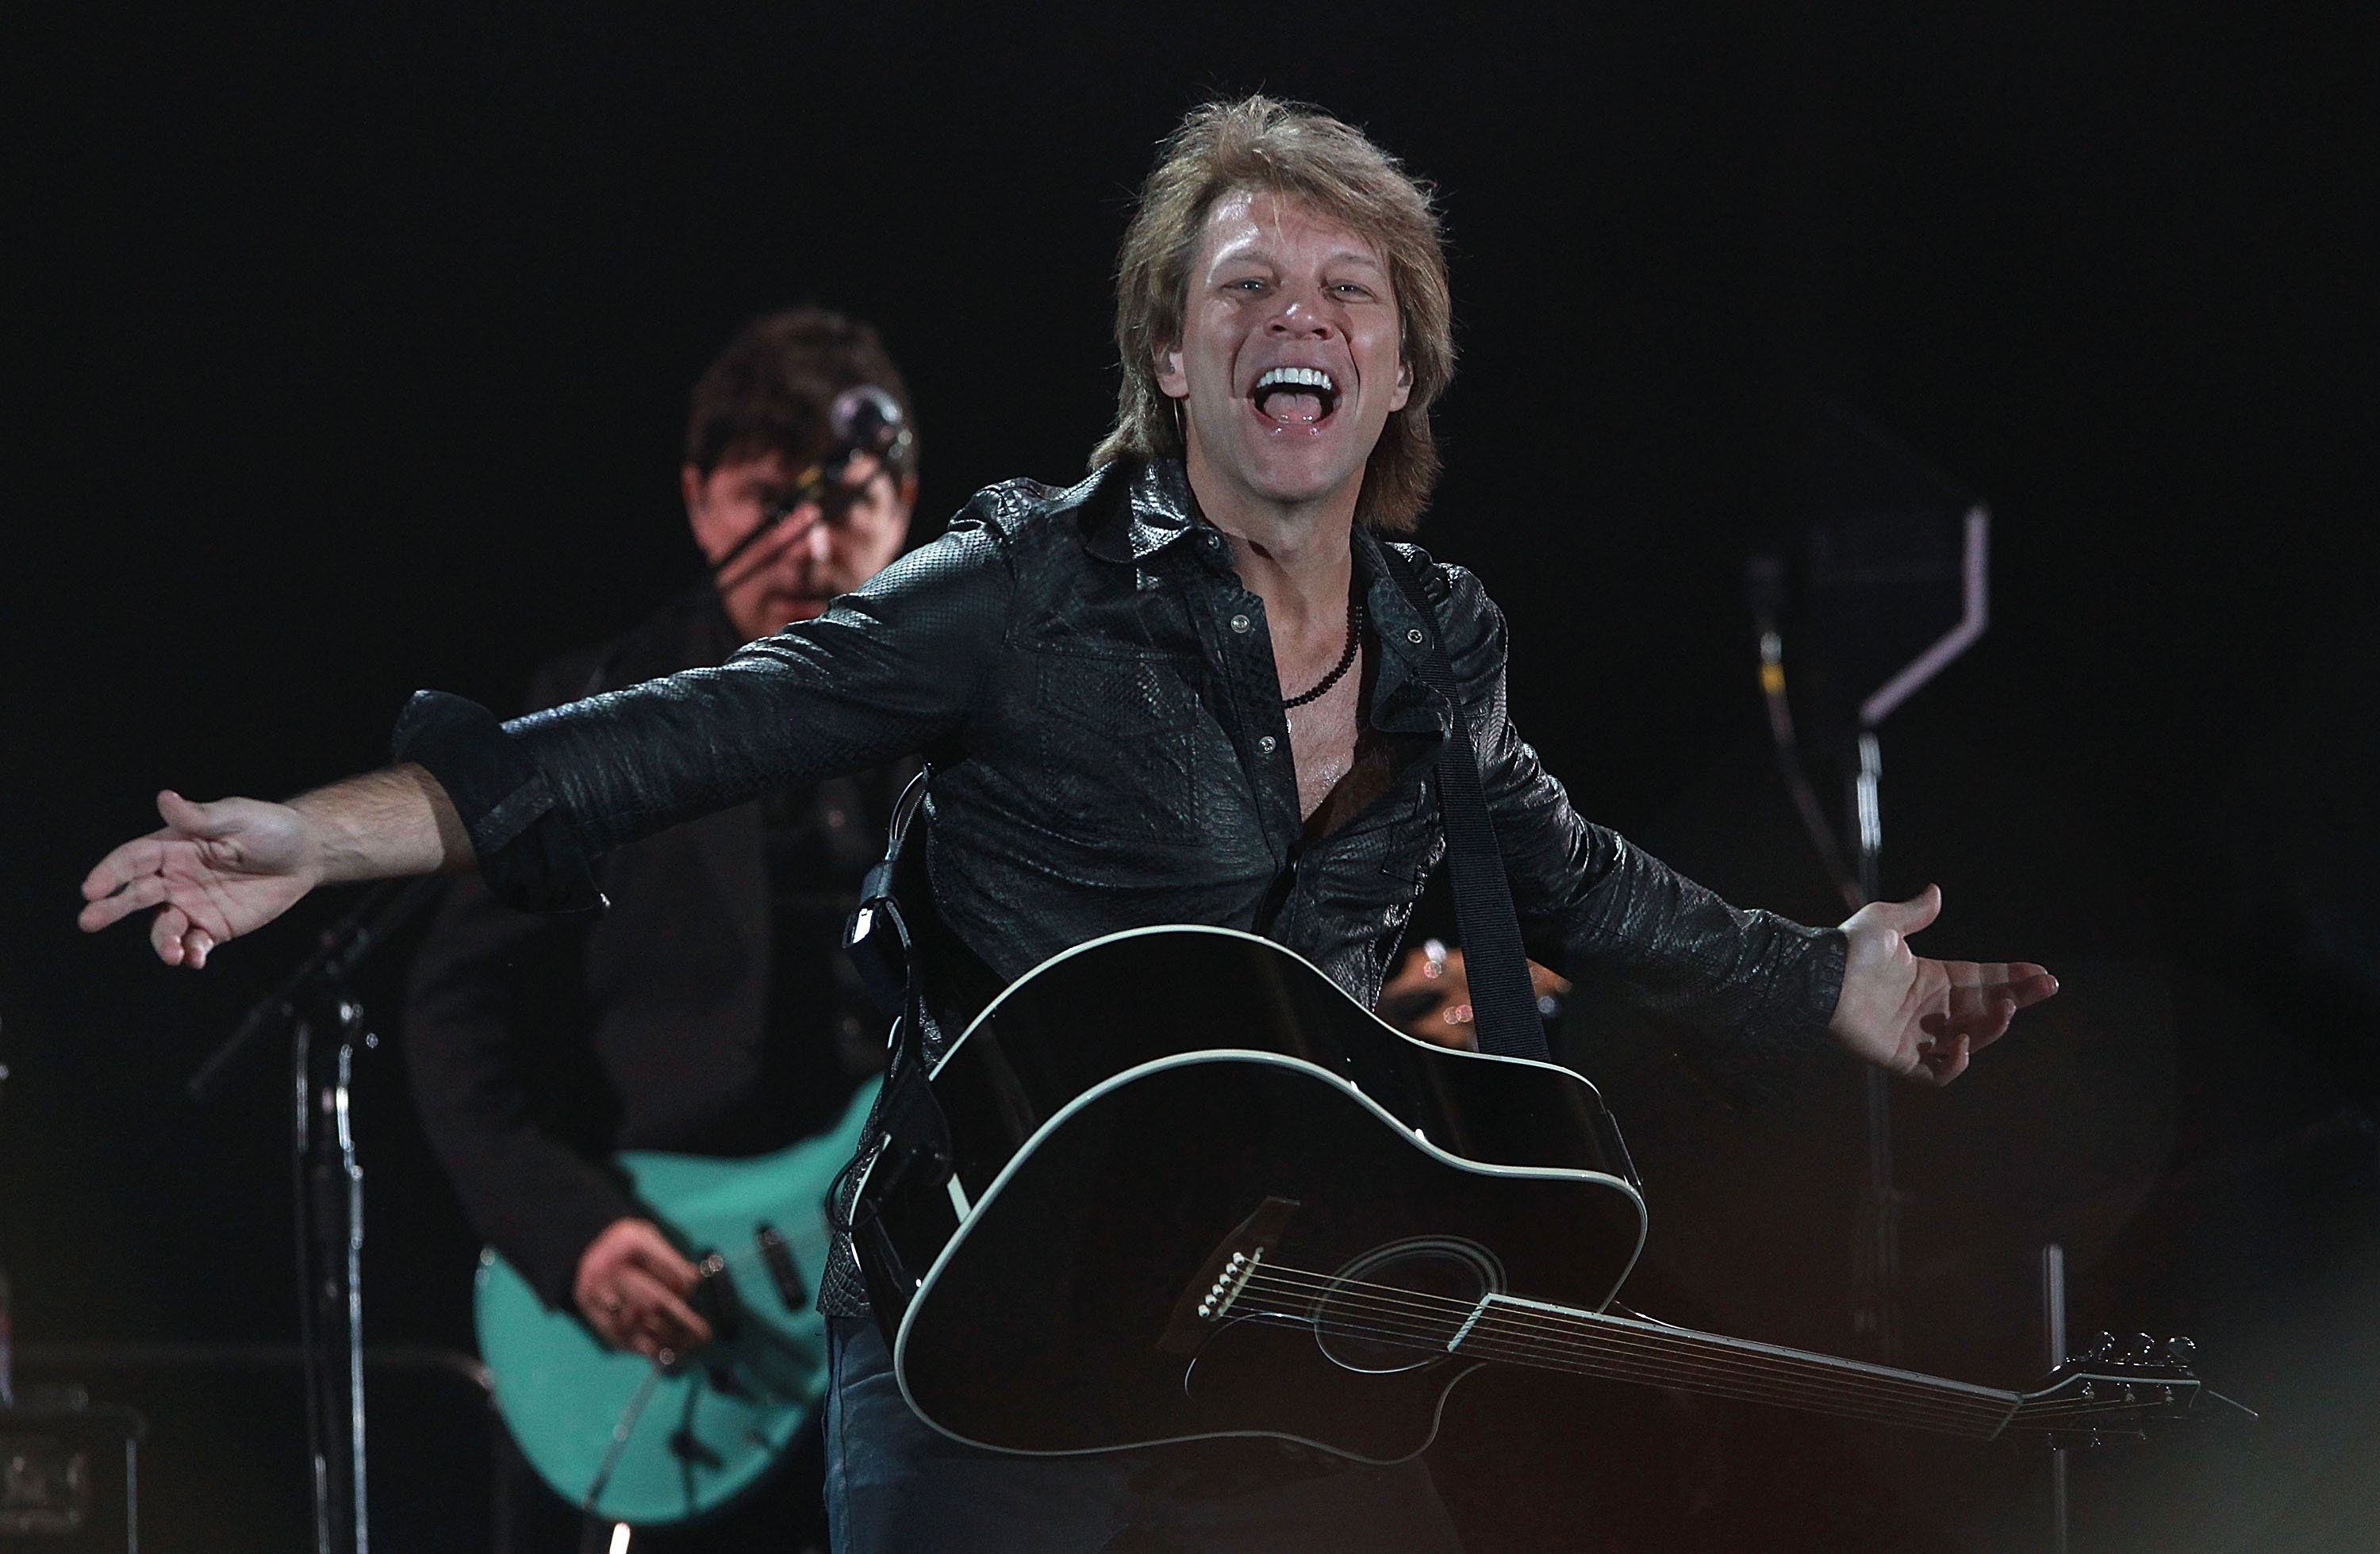 Bon Jovi stands on stage in all black, with a black guitar, during a performance at Etihad Stadium in Melbourne, Australia in 10`0